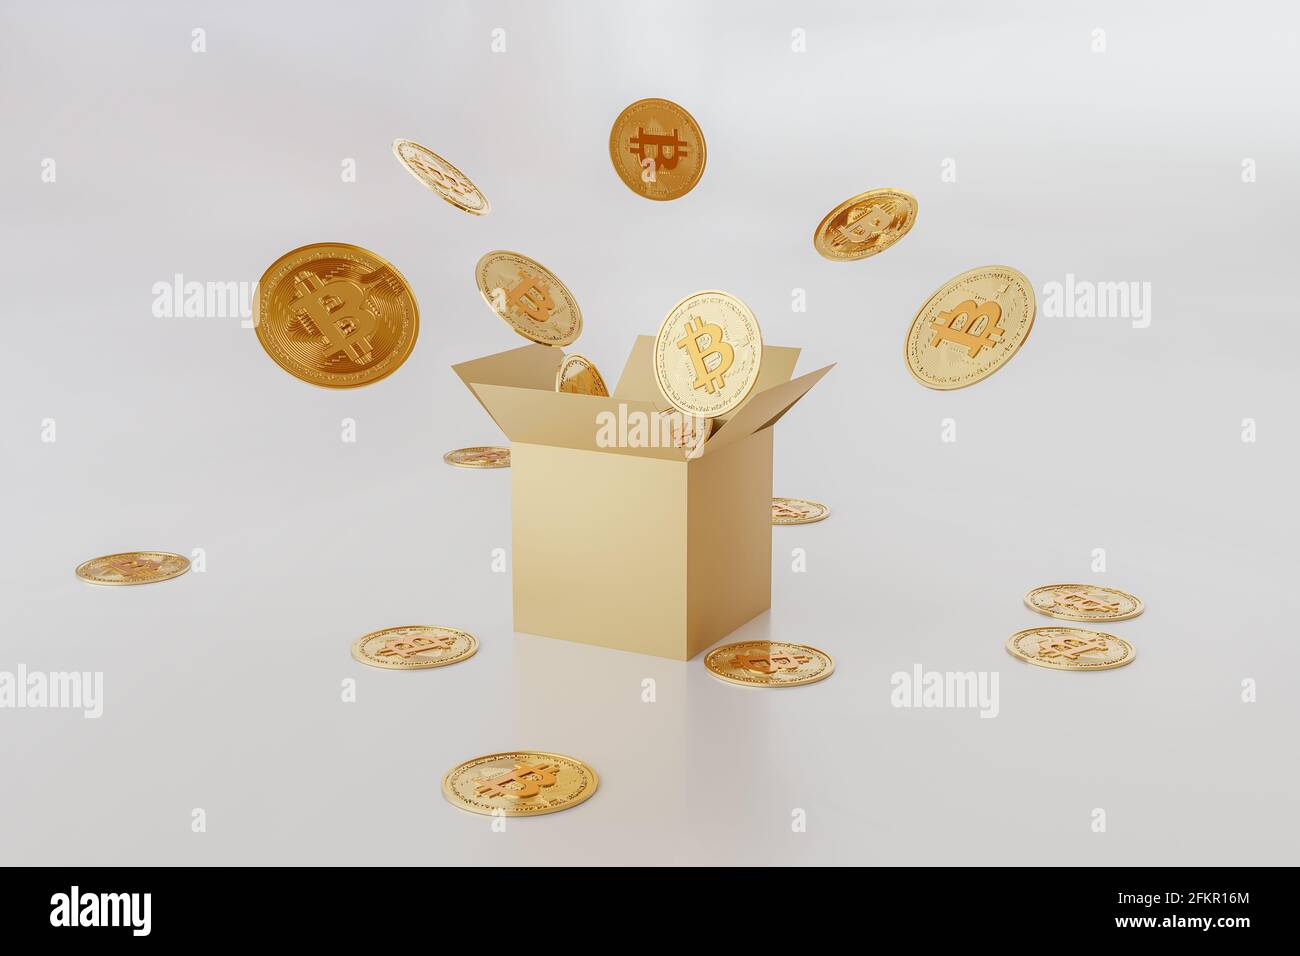 3d gold bank. Bitcoin symbol. Surprise inside open box isolated on white background abstract with golden bitcoins. Stock Photo